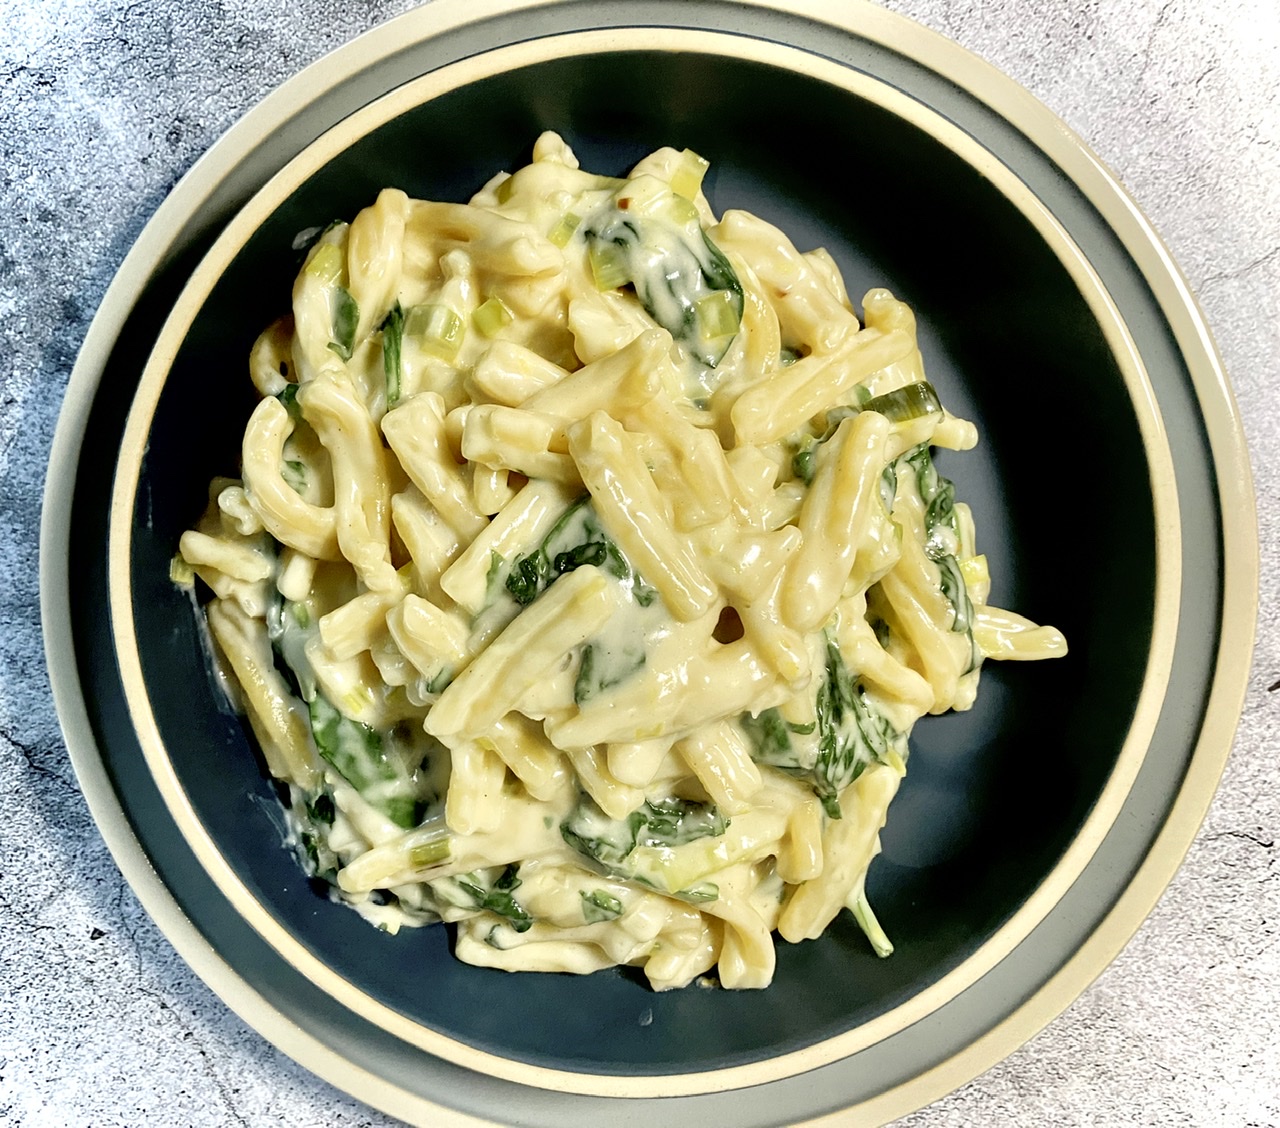 9D5E23AE 90D9 4F1D 9514 C206740DEB33 - Meatless Monday Lemony White Cheddar Pasta with Leeks & Spinach